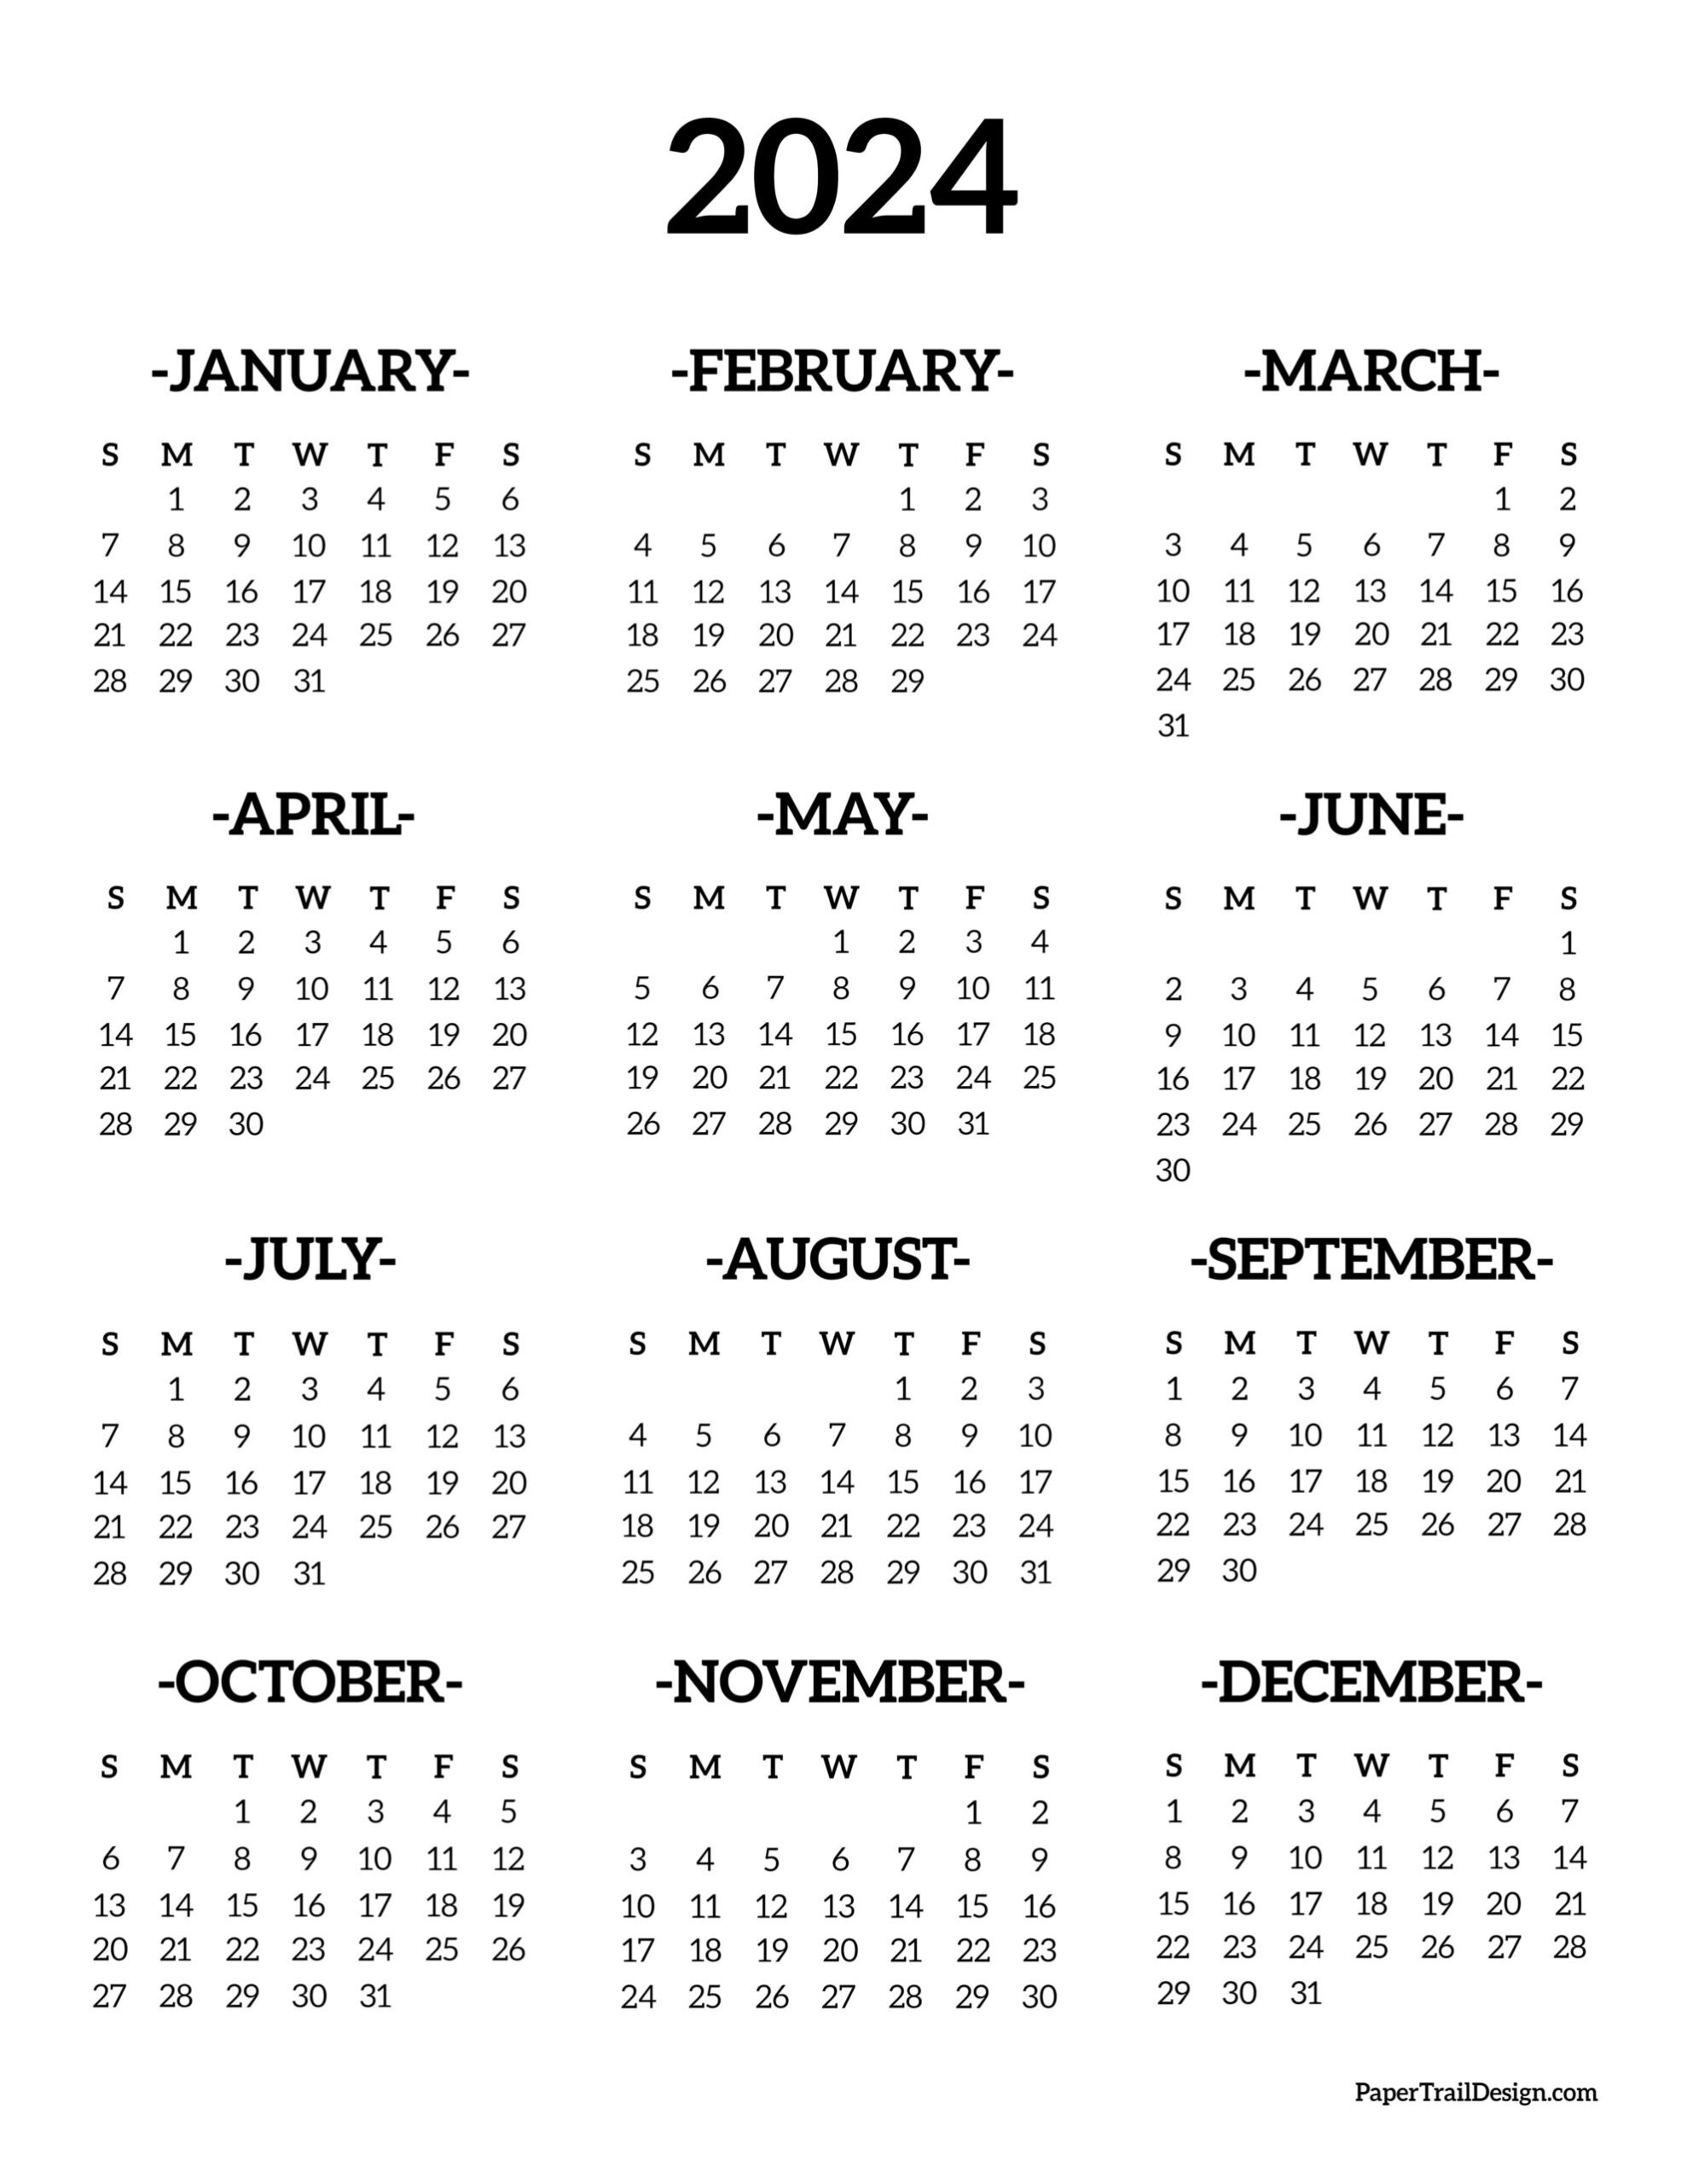 Calendar 2024 Printable One Page - Paper Trail Design | Free Printable Calendar 2024 One Page